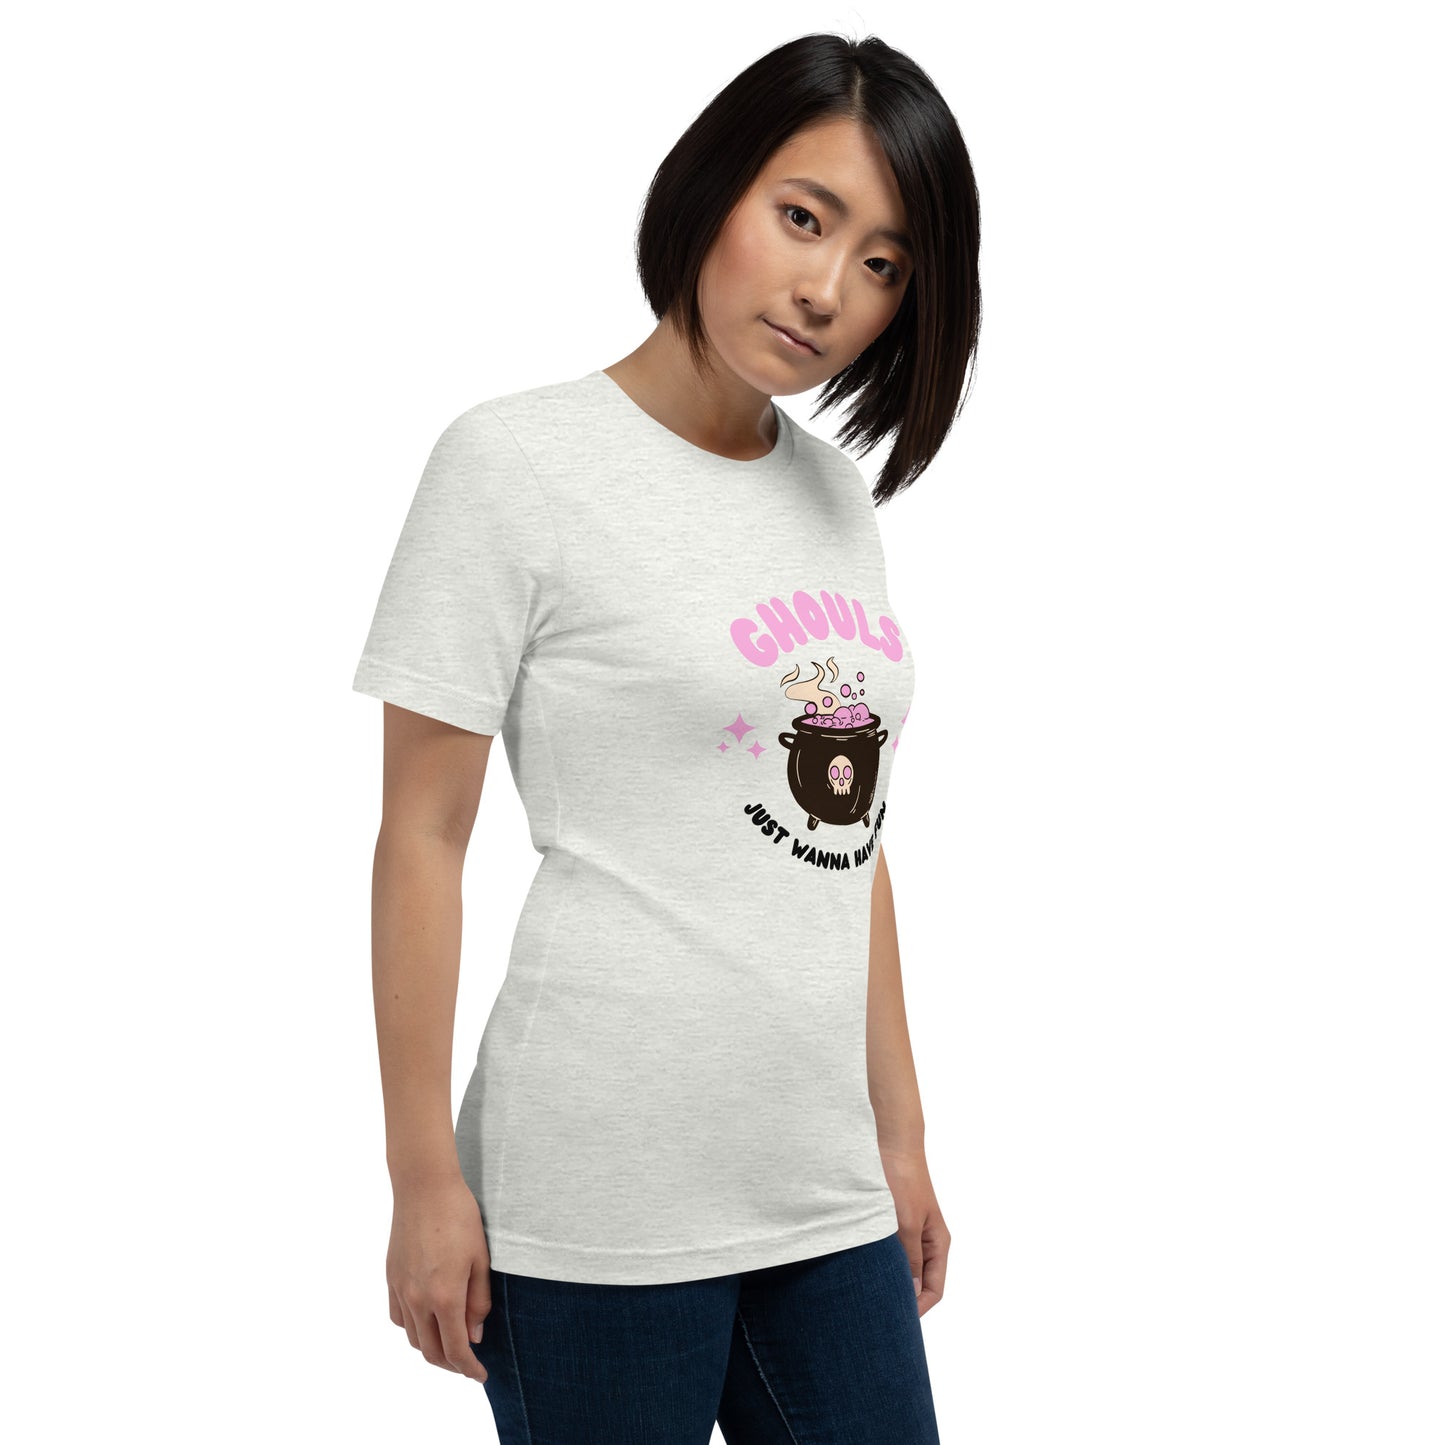 Ghouls Just Wanna Have Fun Unisex T-shirt